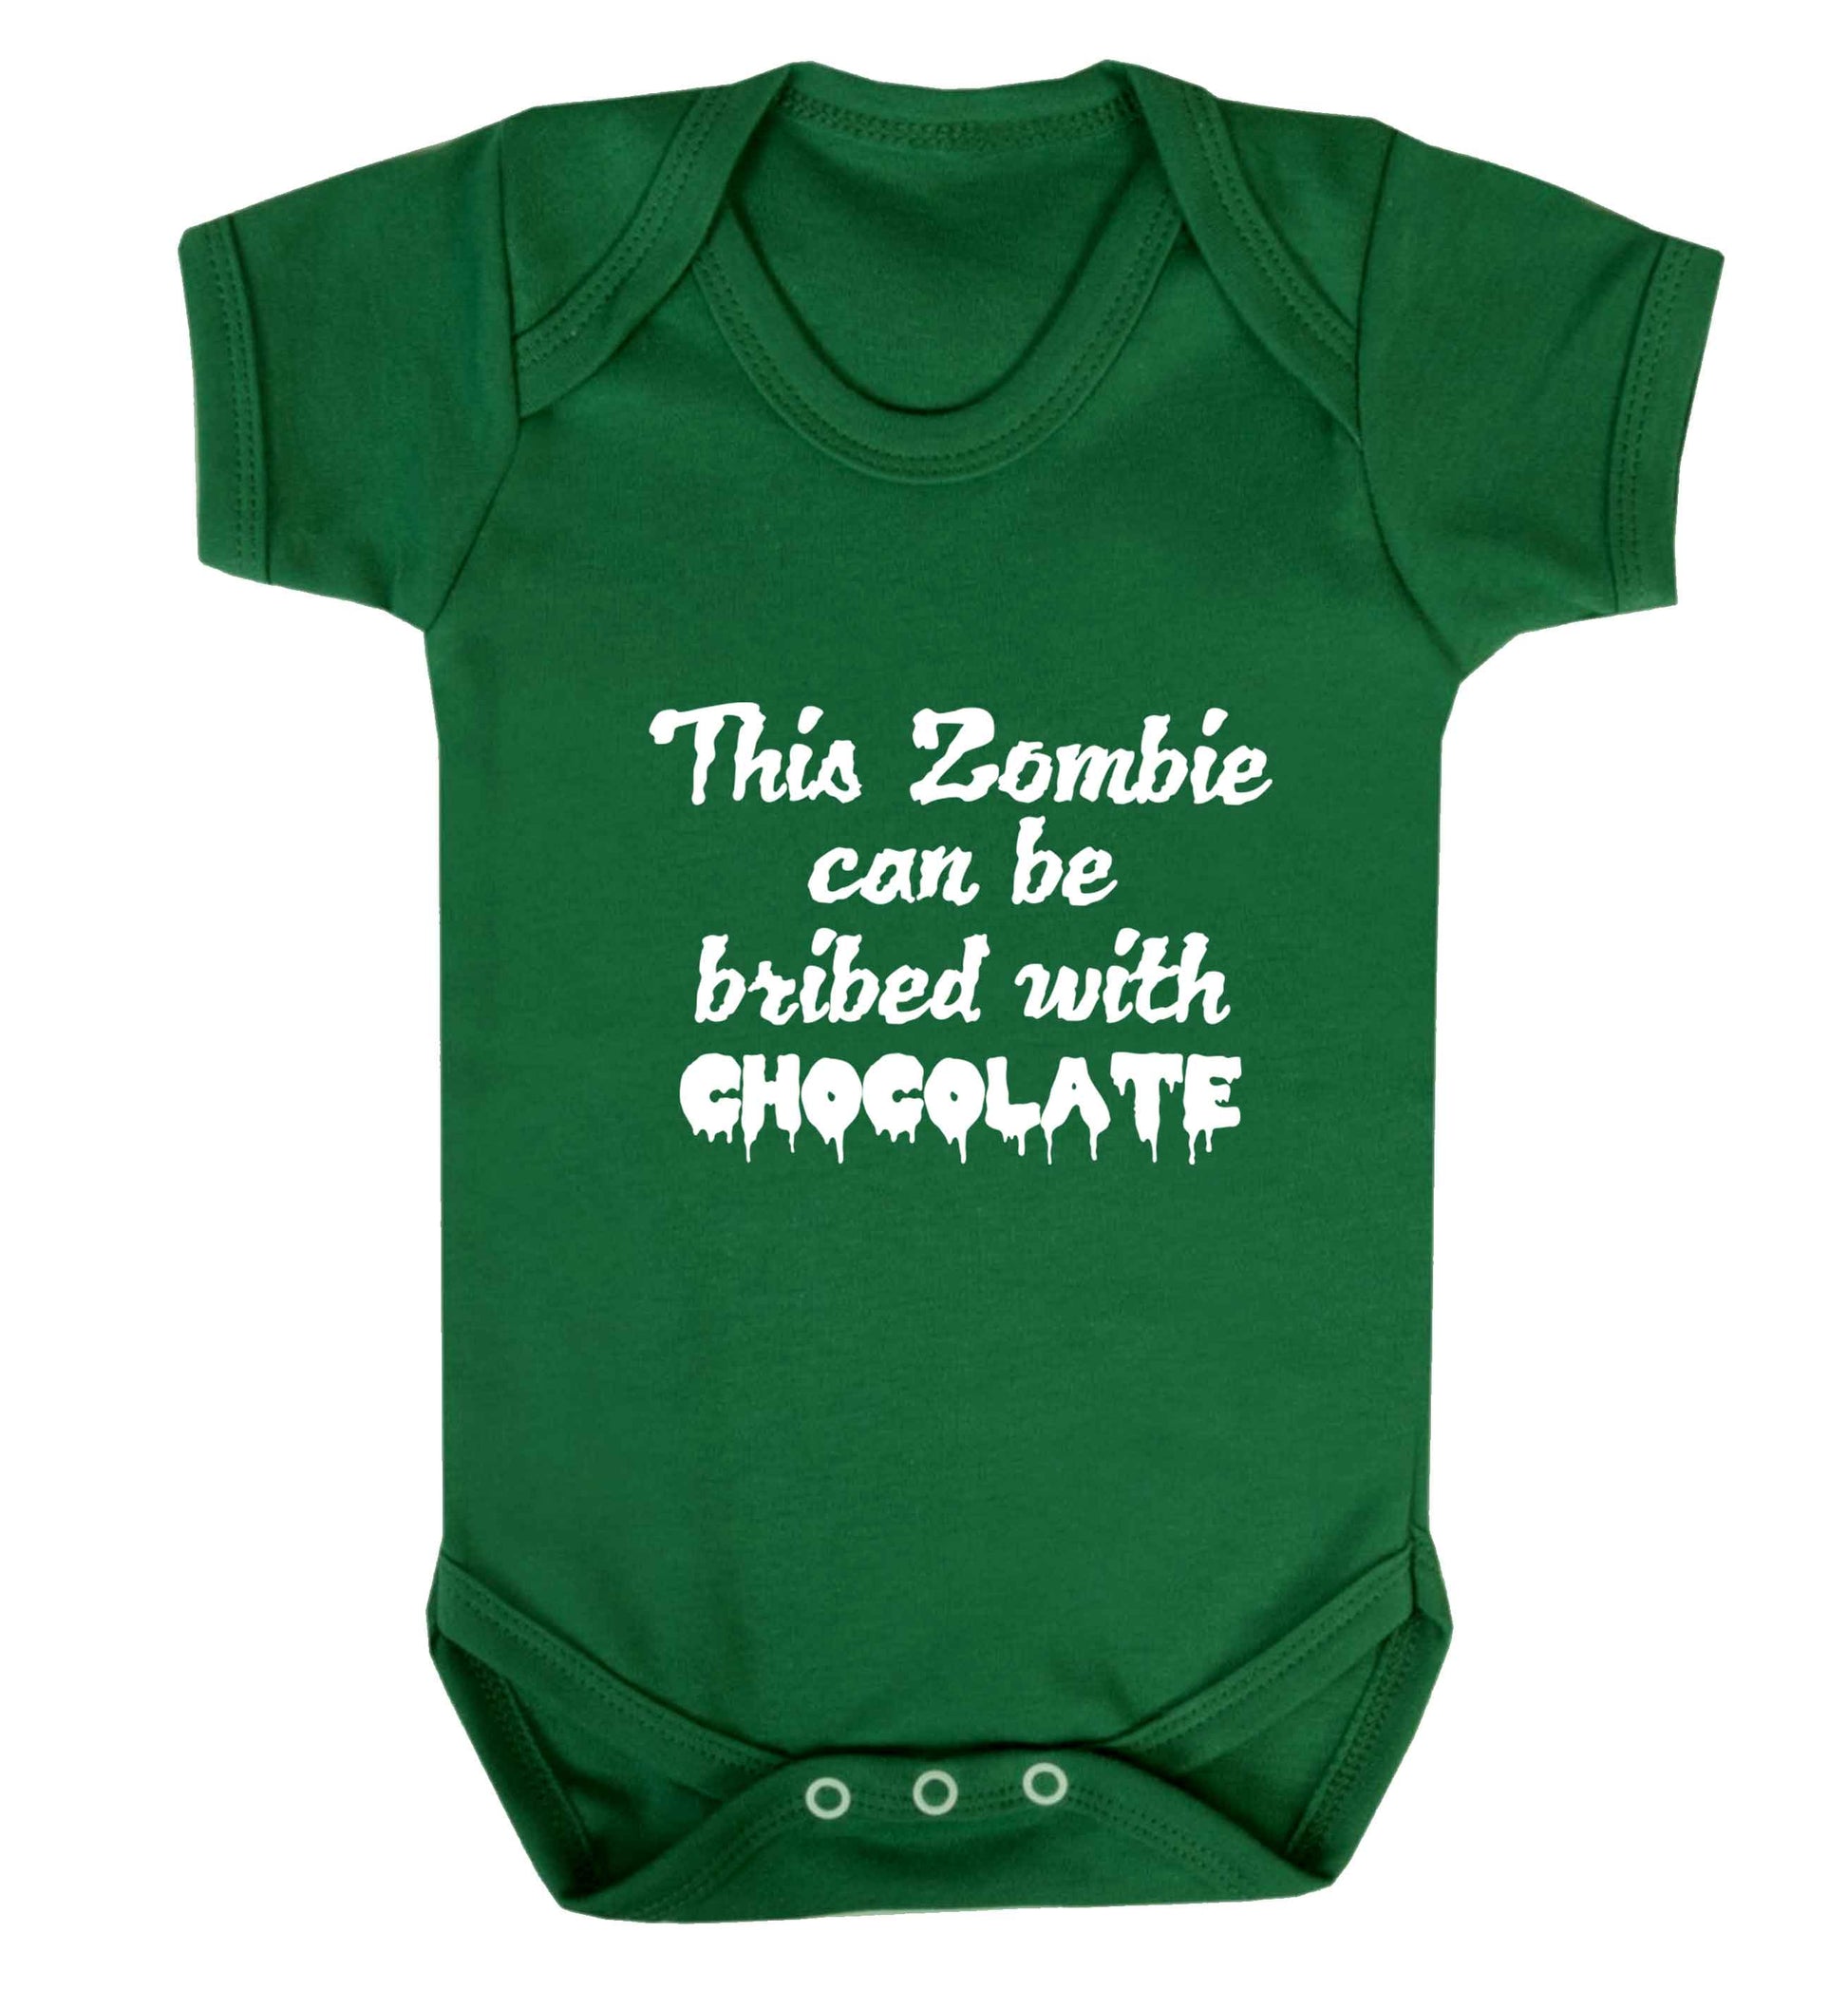 This zombie can be bribed with chocolate baby vest green 18-24 months